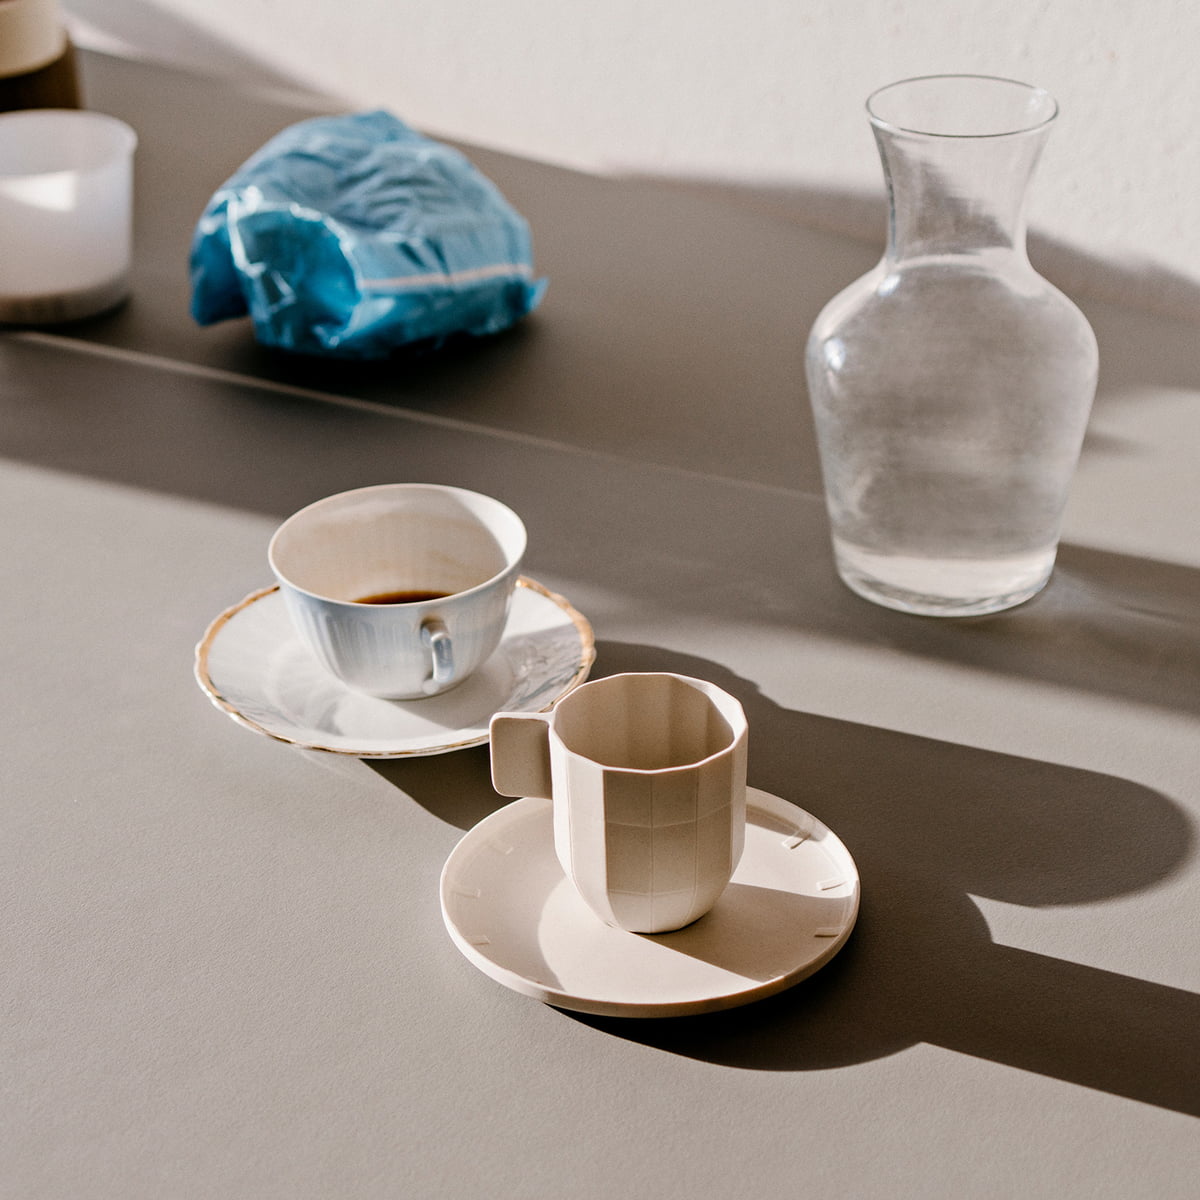 Authentic HAY Paper Porcelain Espresso CupDesign Within Reach 